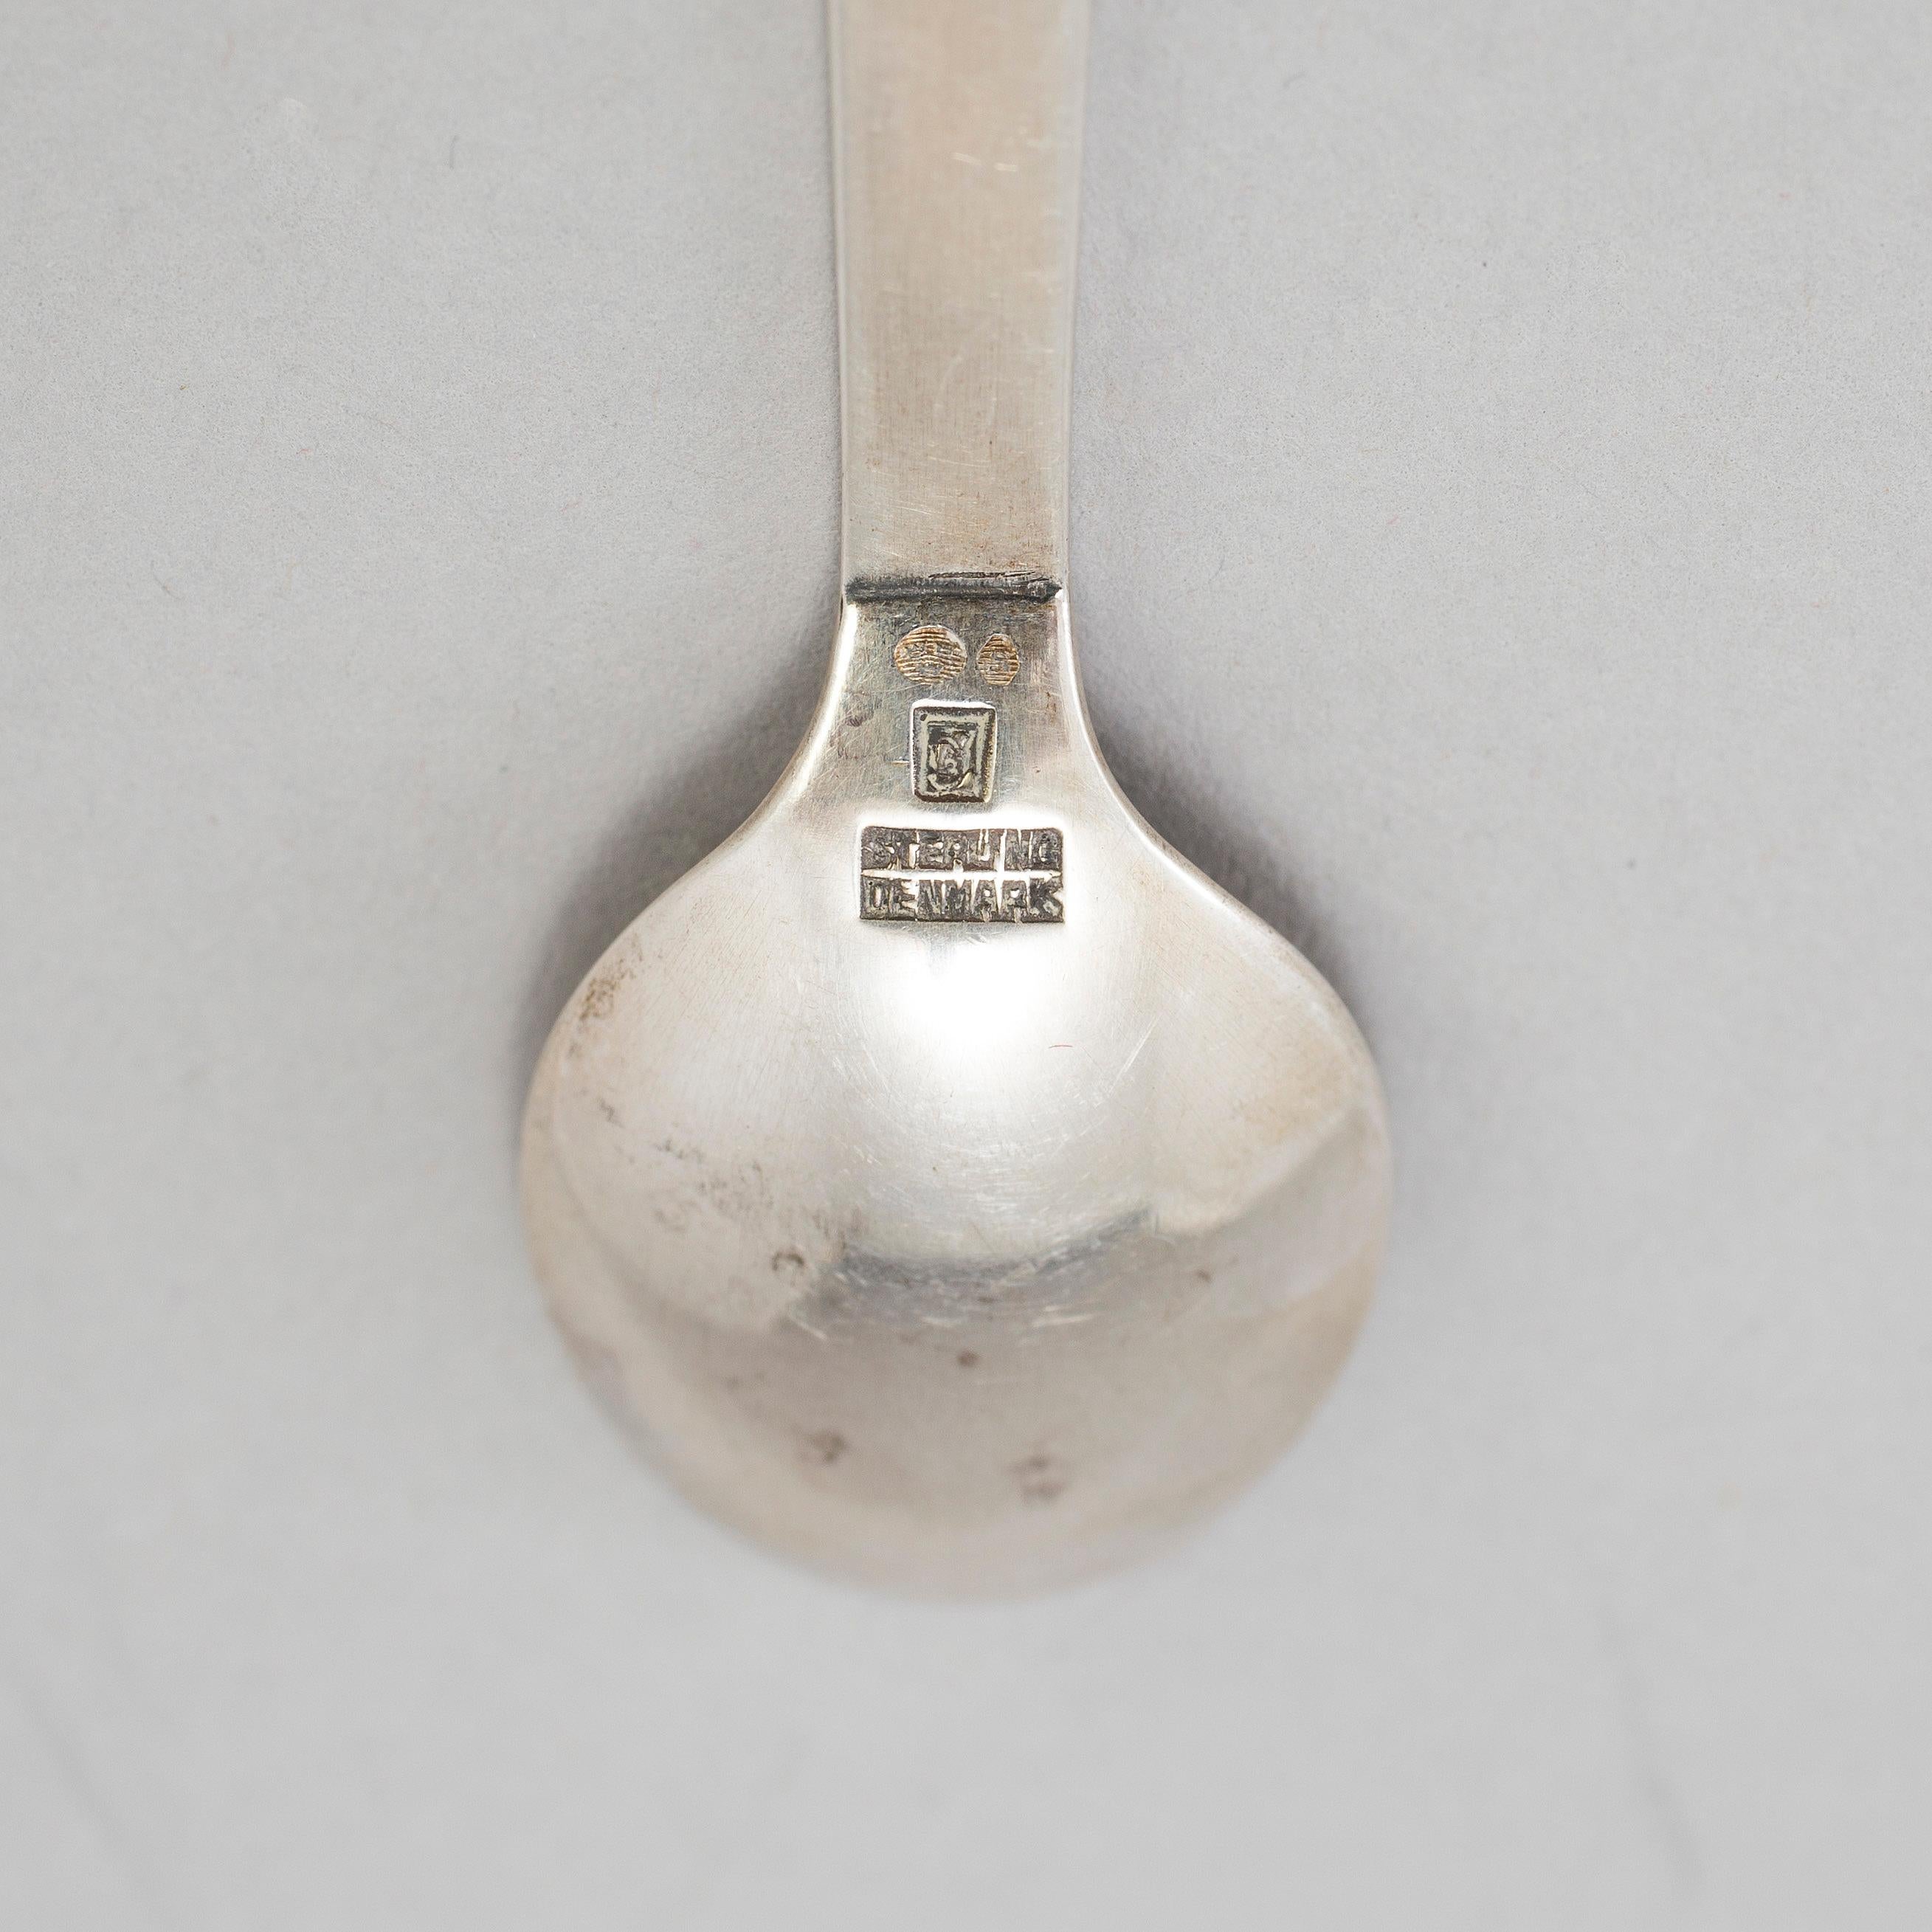 Georg Jensen (Denmark. 1866-1935)
a set of six silver mocca spoons model Pyramid designed by Harald Nielsen for Georg Jensen. Weight ca 66 gram
In its original box. Length ca 9.5 cm
Good condition.